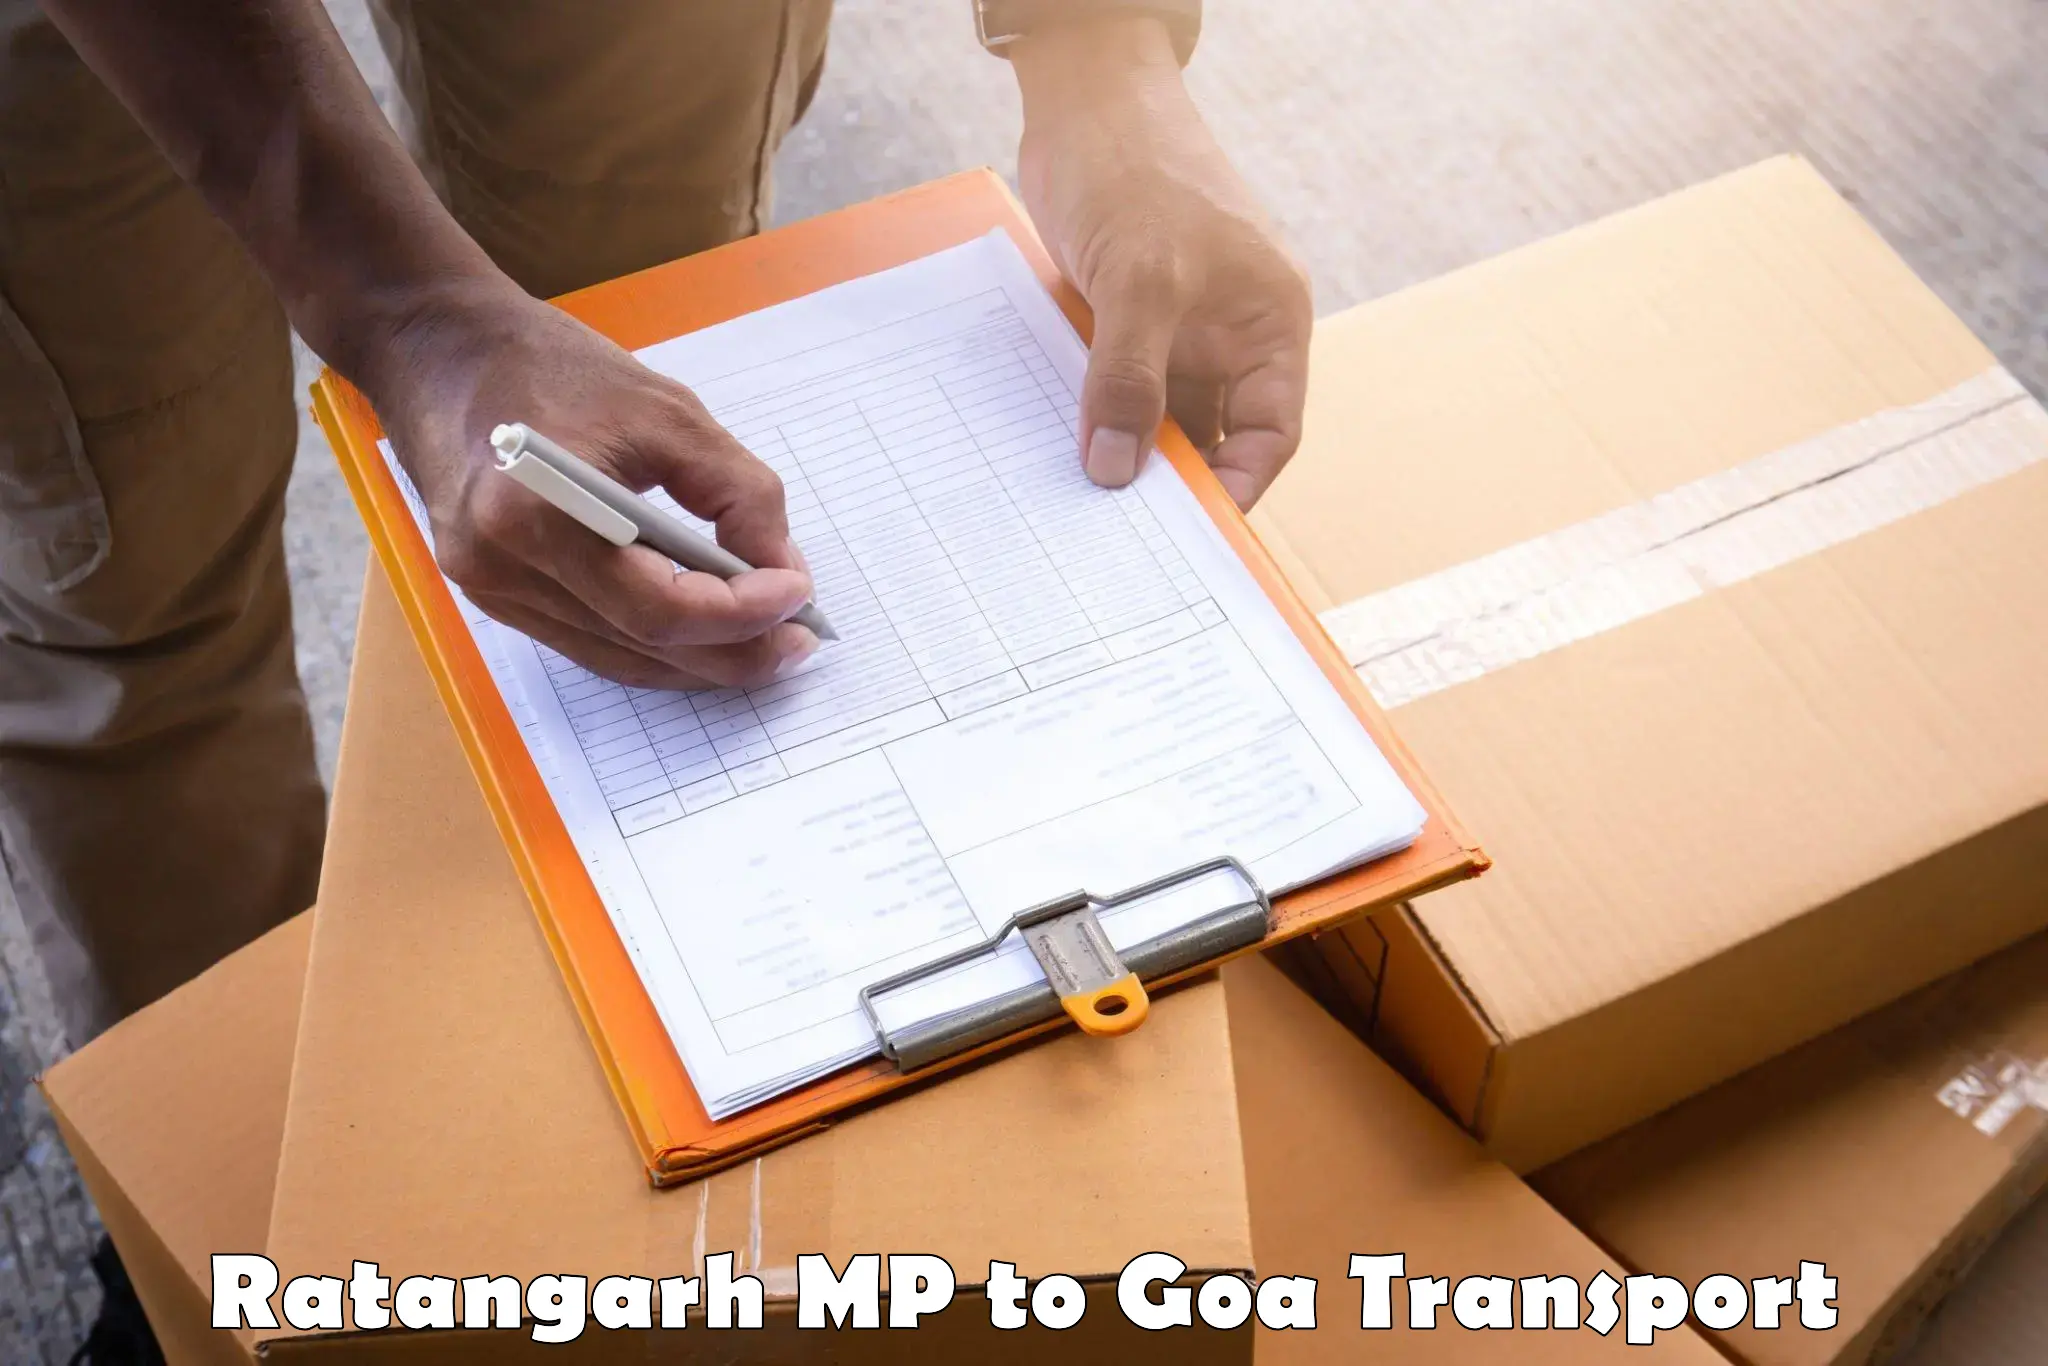 Daily transport service Ratangarh MP to South Goa